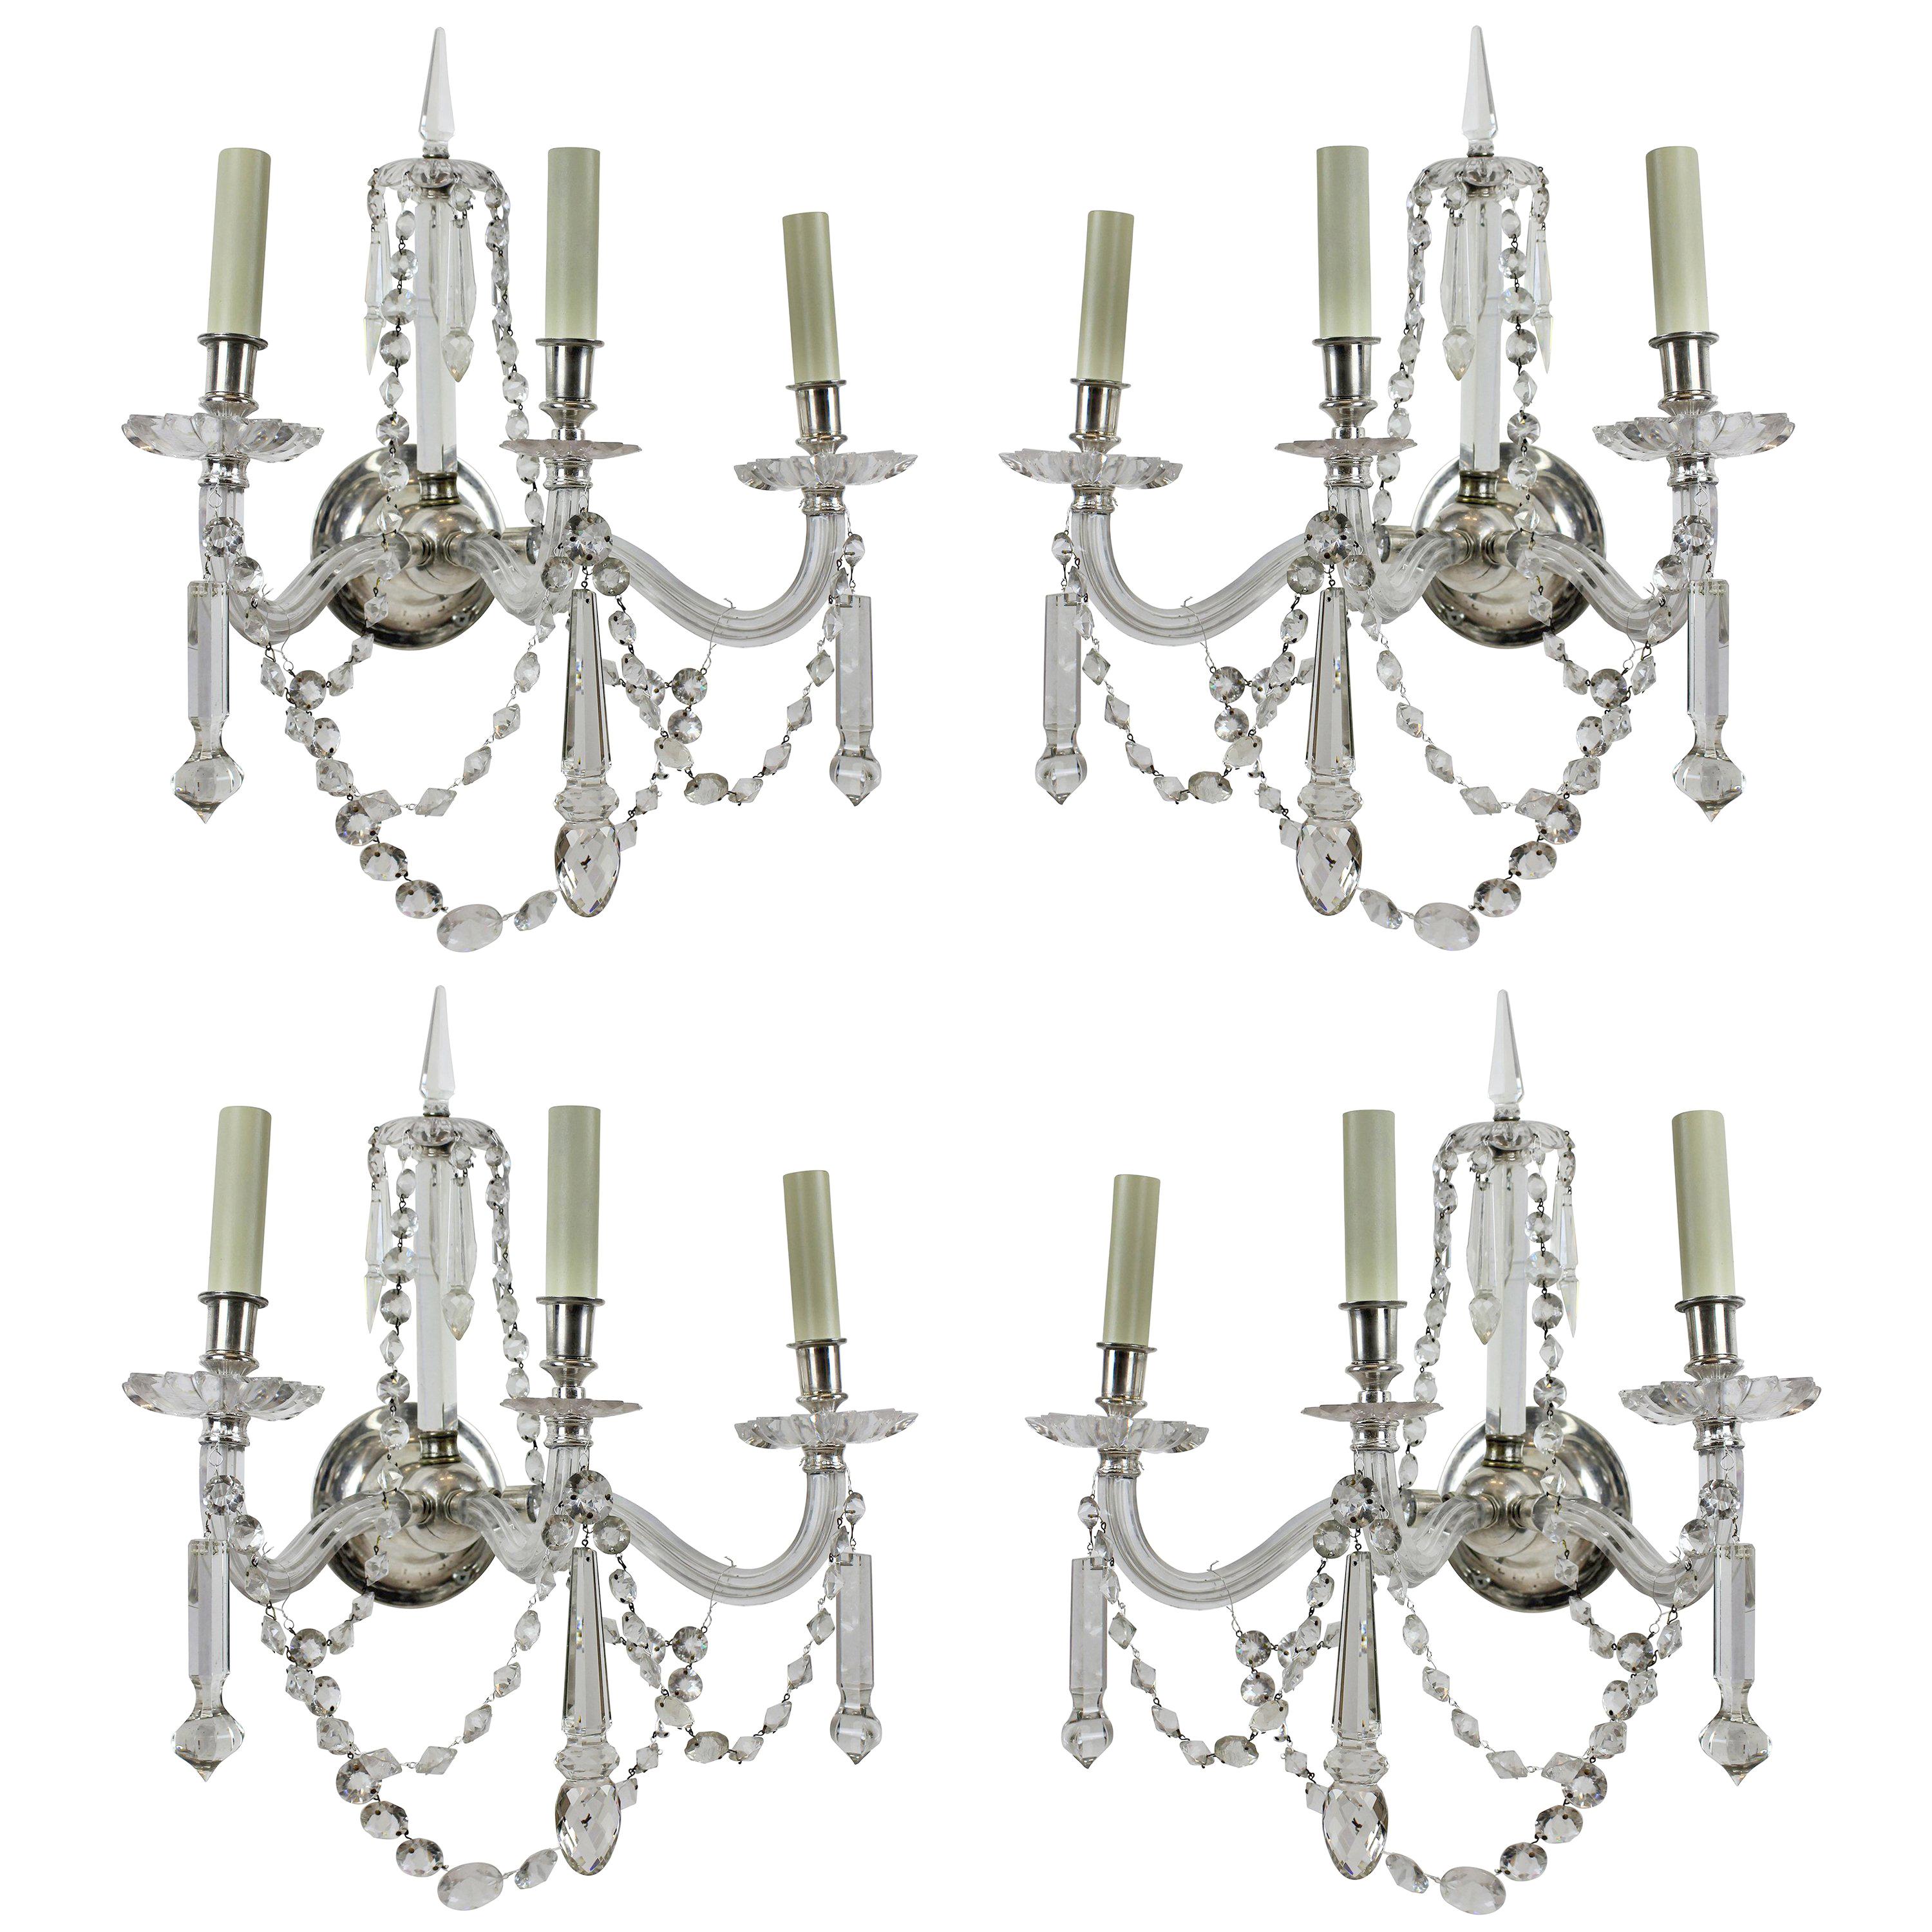 A fine set of four English cut-glass, three branch wall sconces. Beautifully hung with swags and spires.
. 